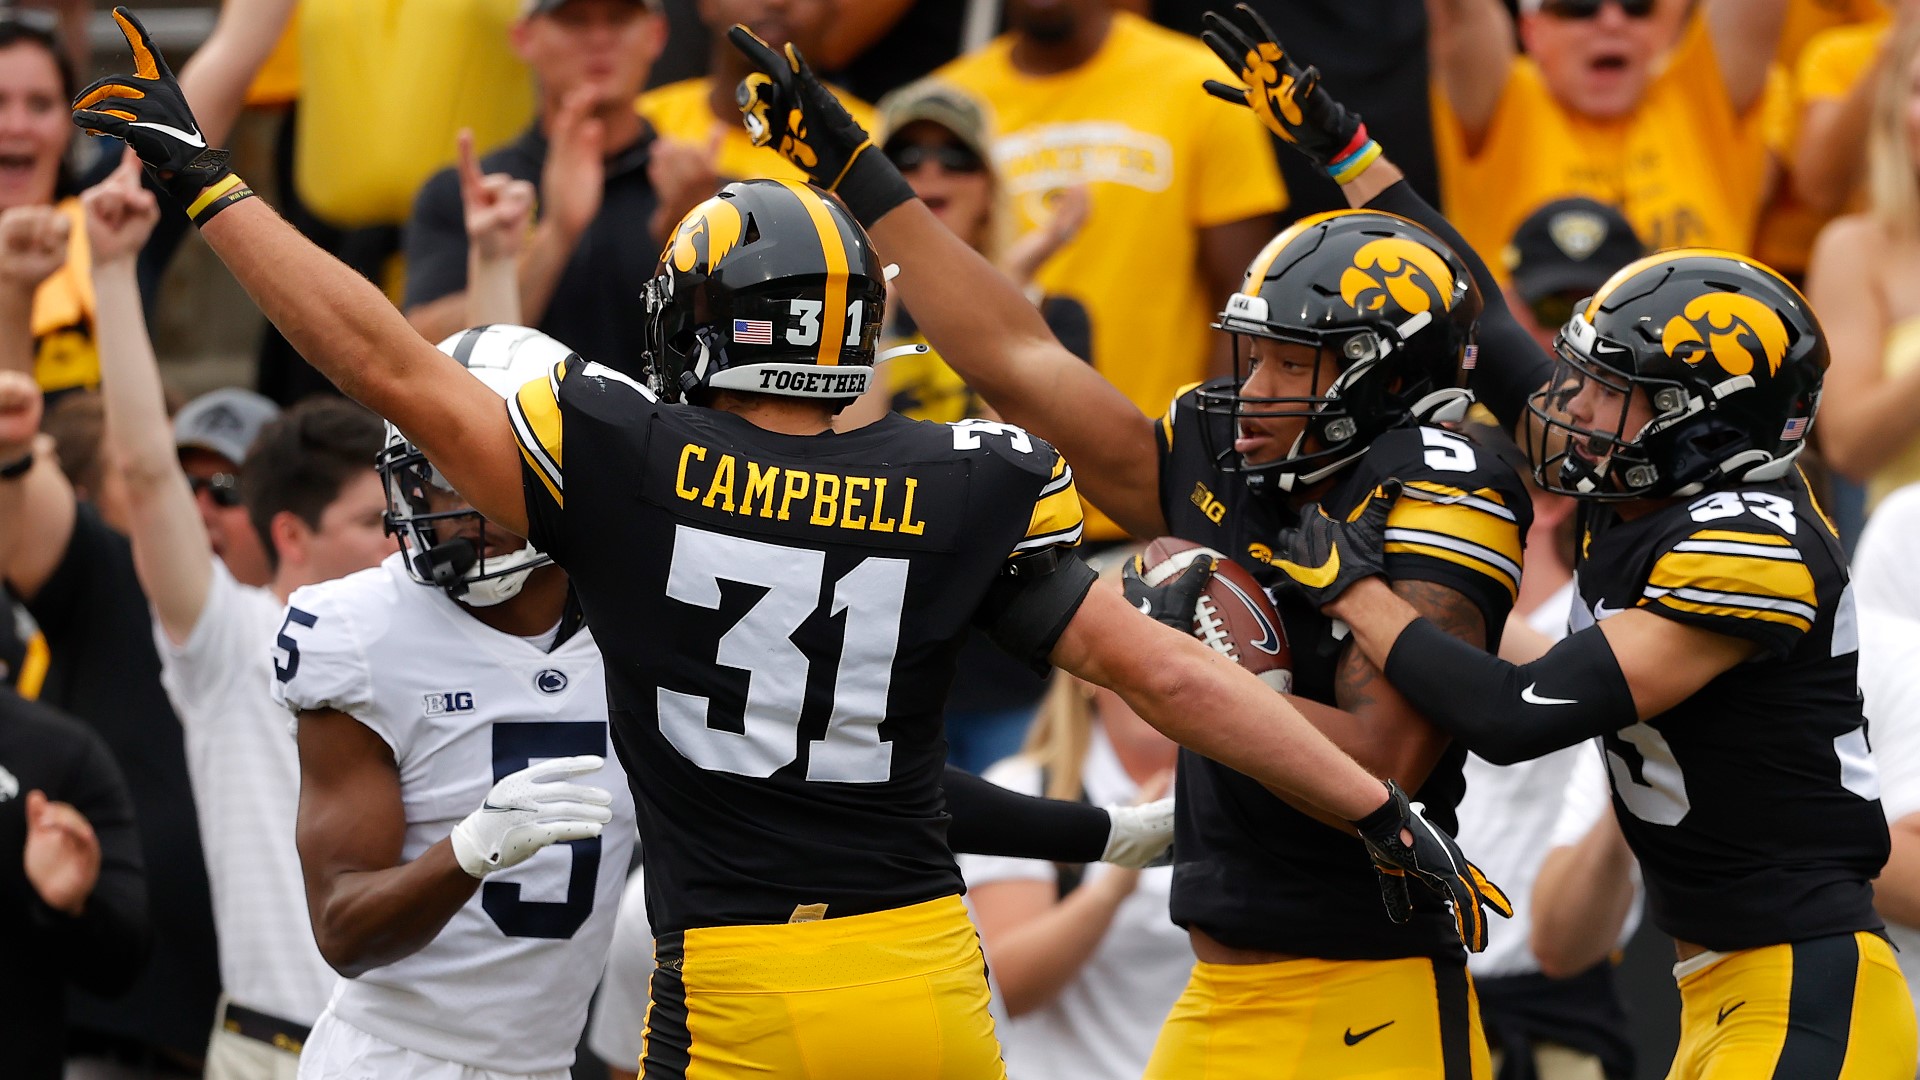 This is Campbell's second time winning the award, and he's the first Hawkeye to win it since Kaevon Merriweather did on Sept. 26.